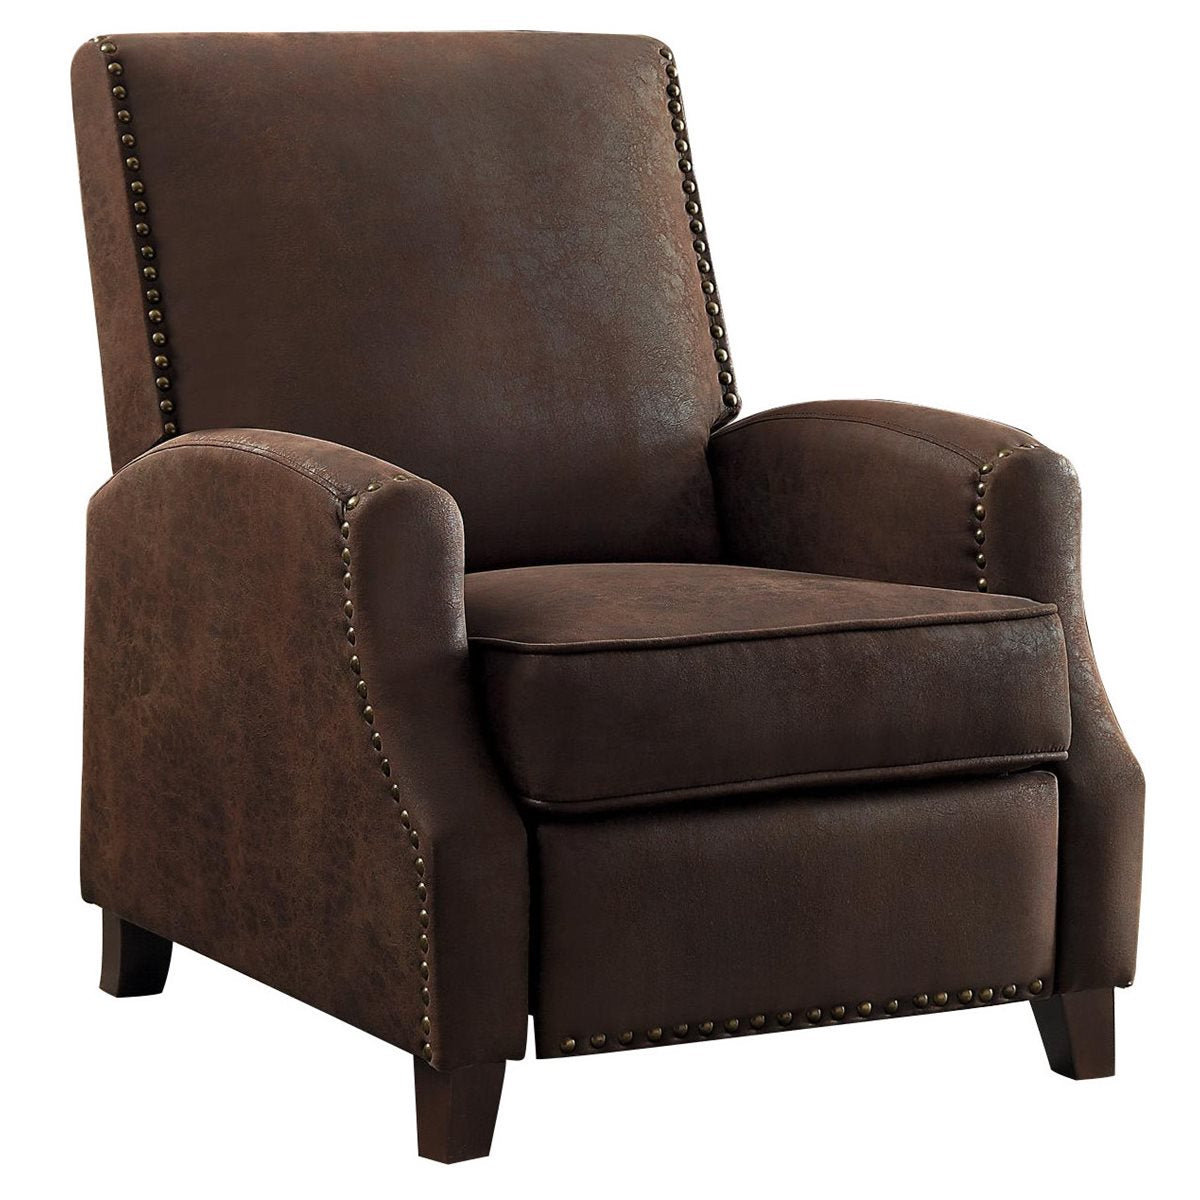 Homelegance Walden Push Back Recliner Chair in Brown Fabric